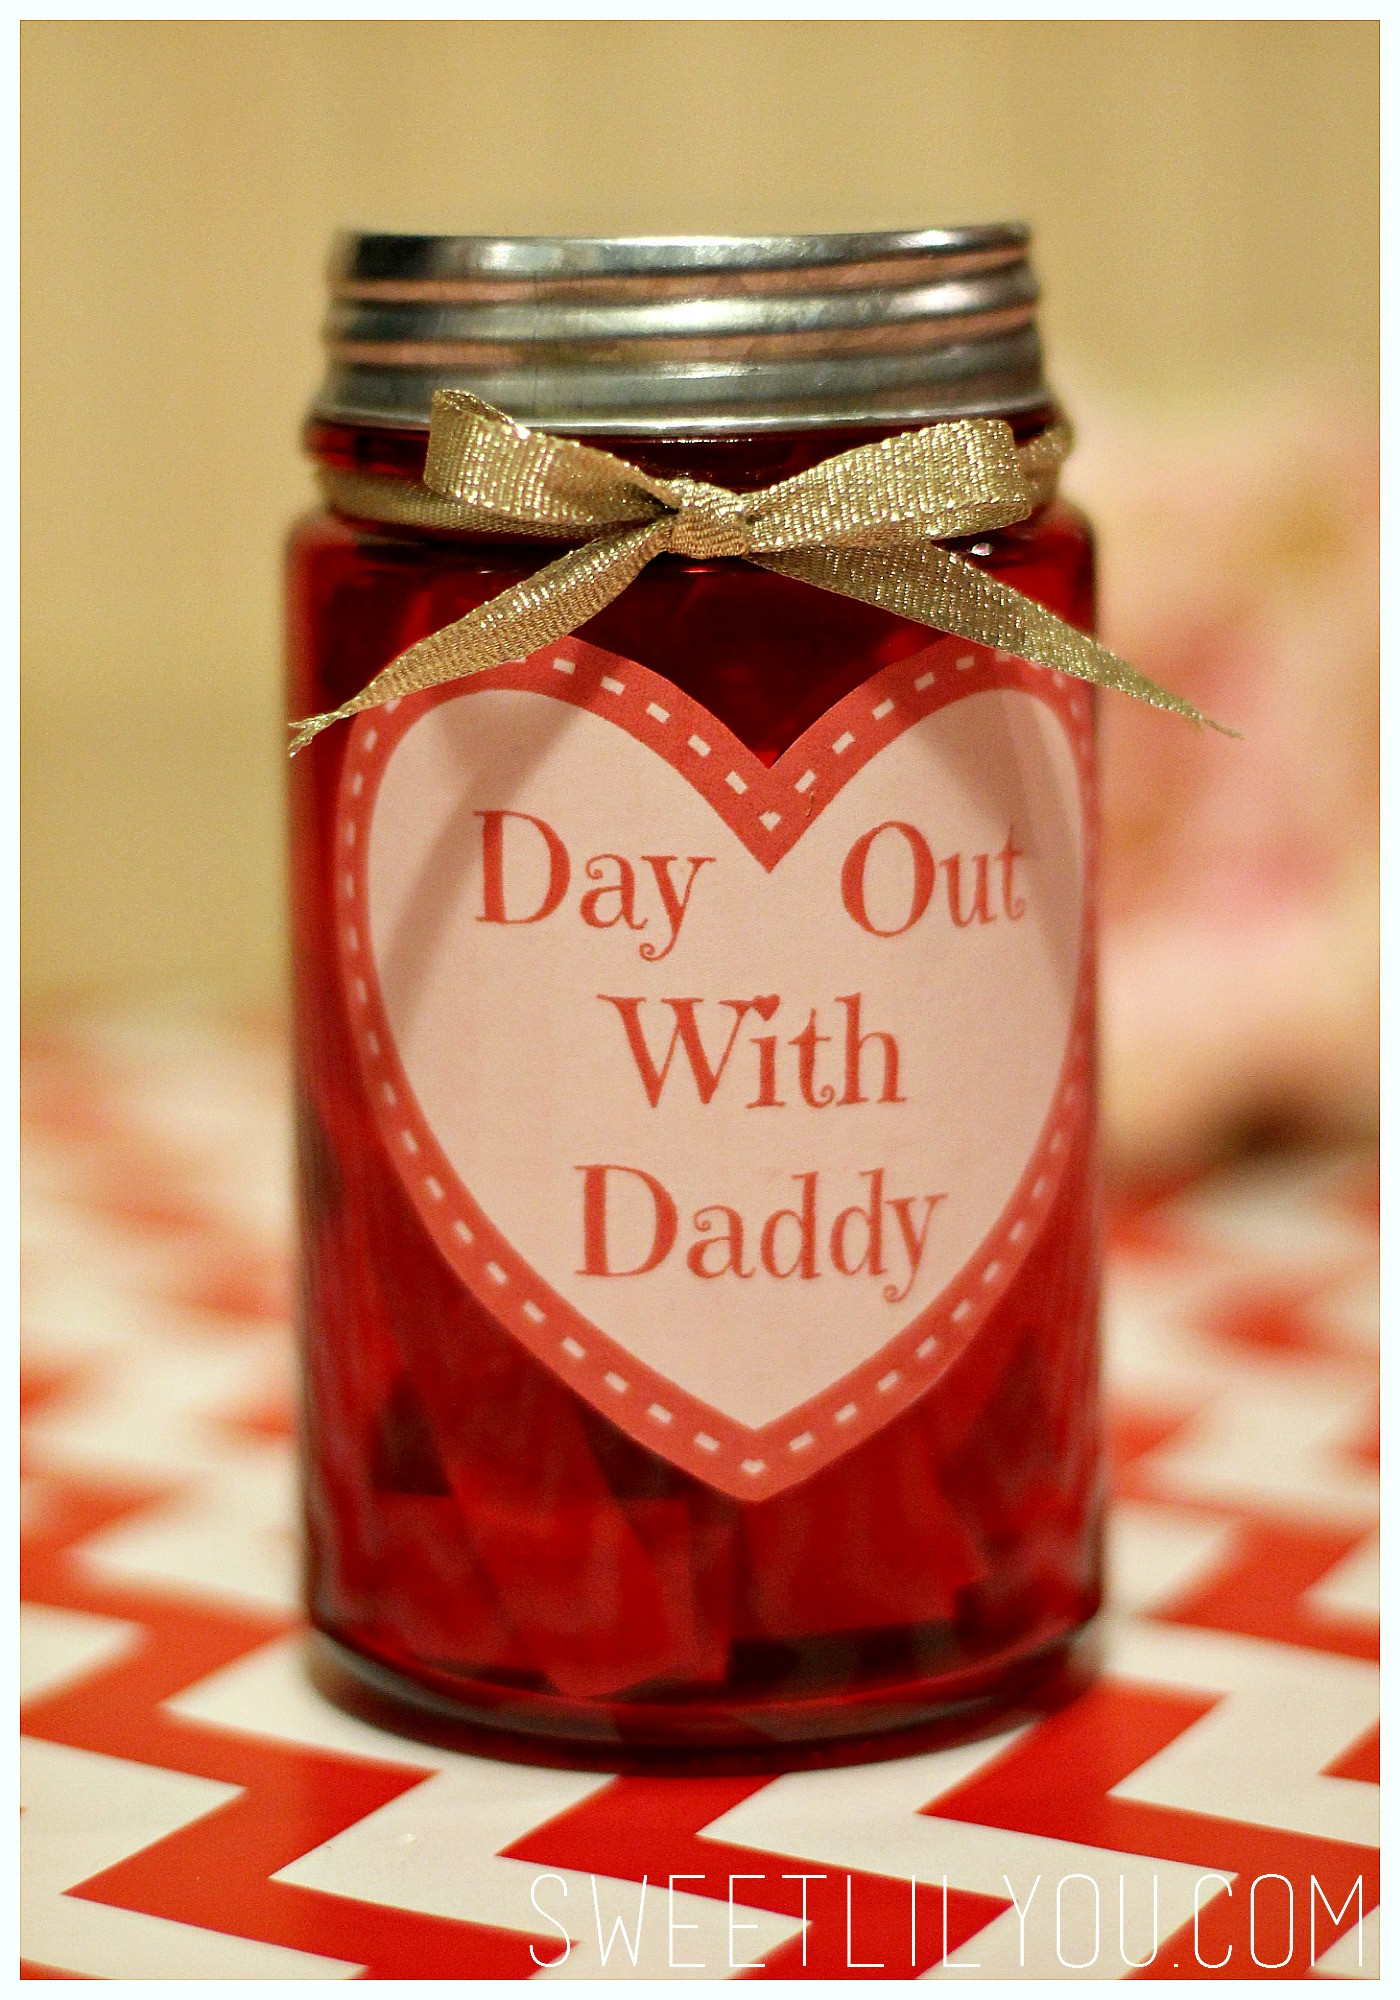 Valentine Gift Ideas for Daddy Lovely Day Out with Daddy Jar Valentine S Day Gift for Dad